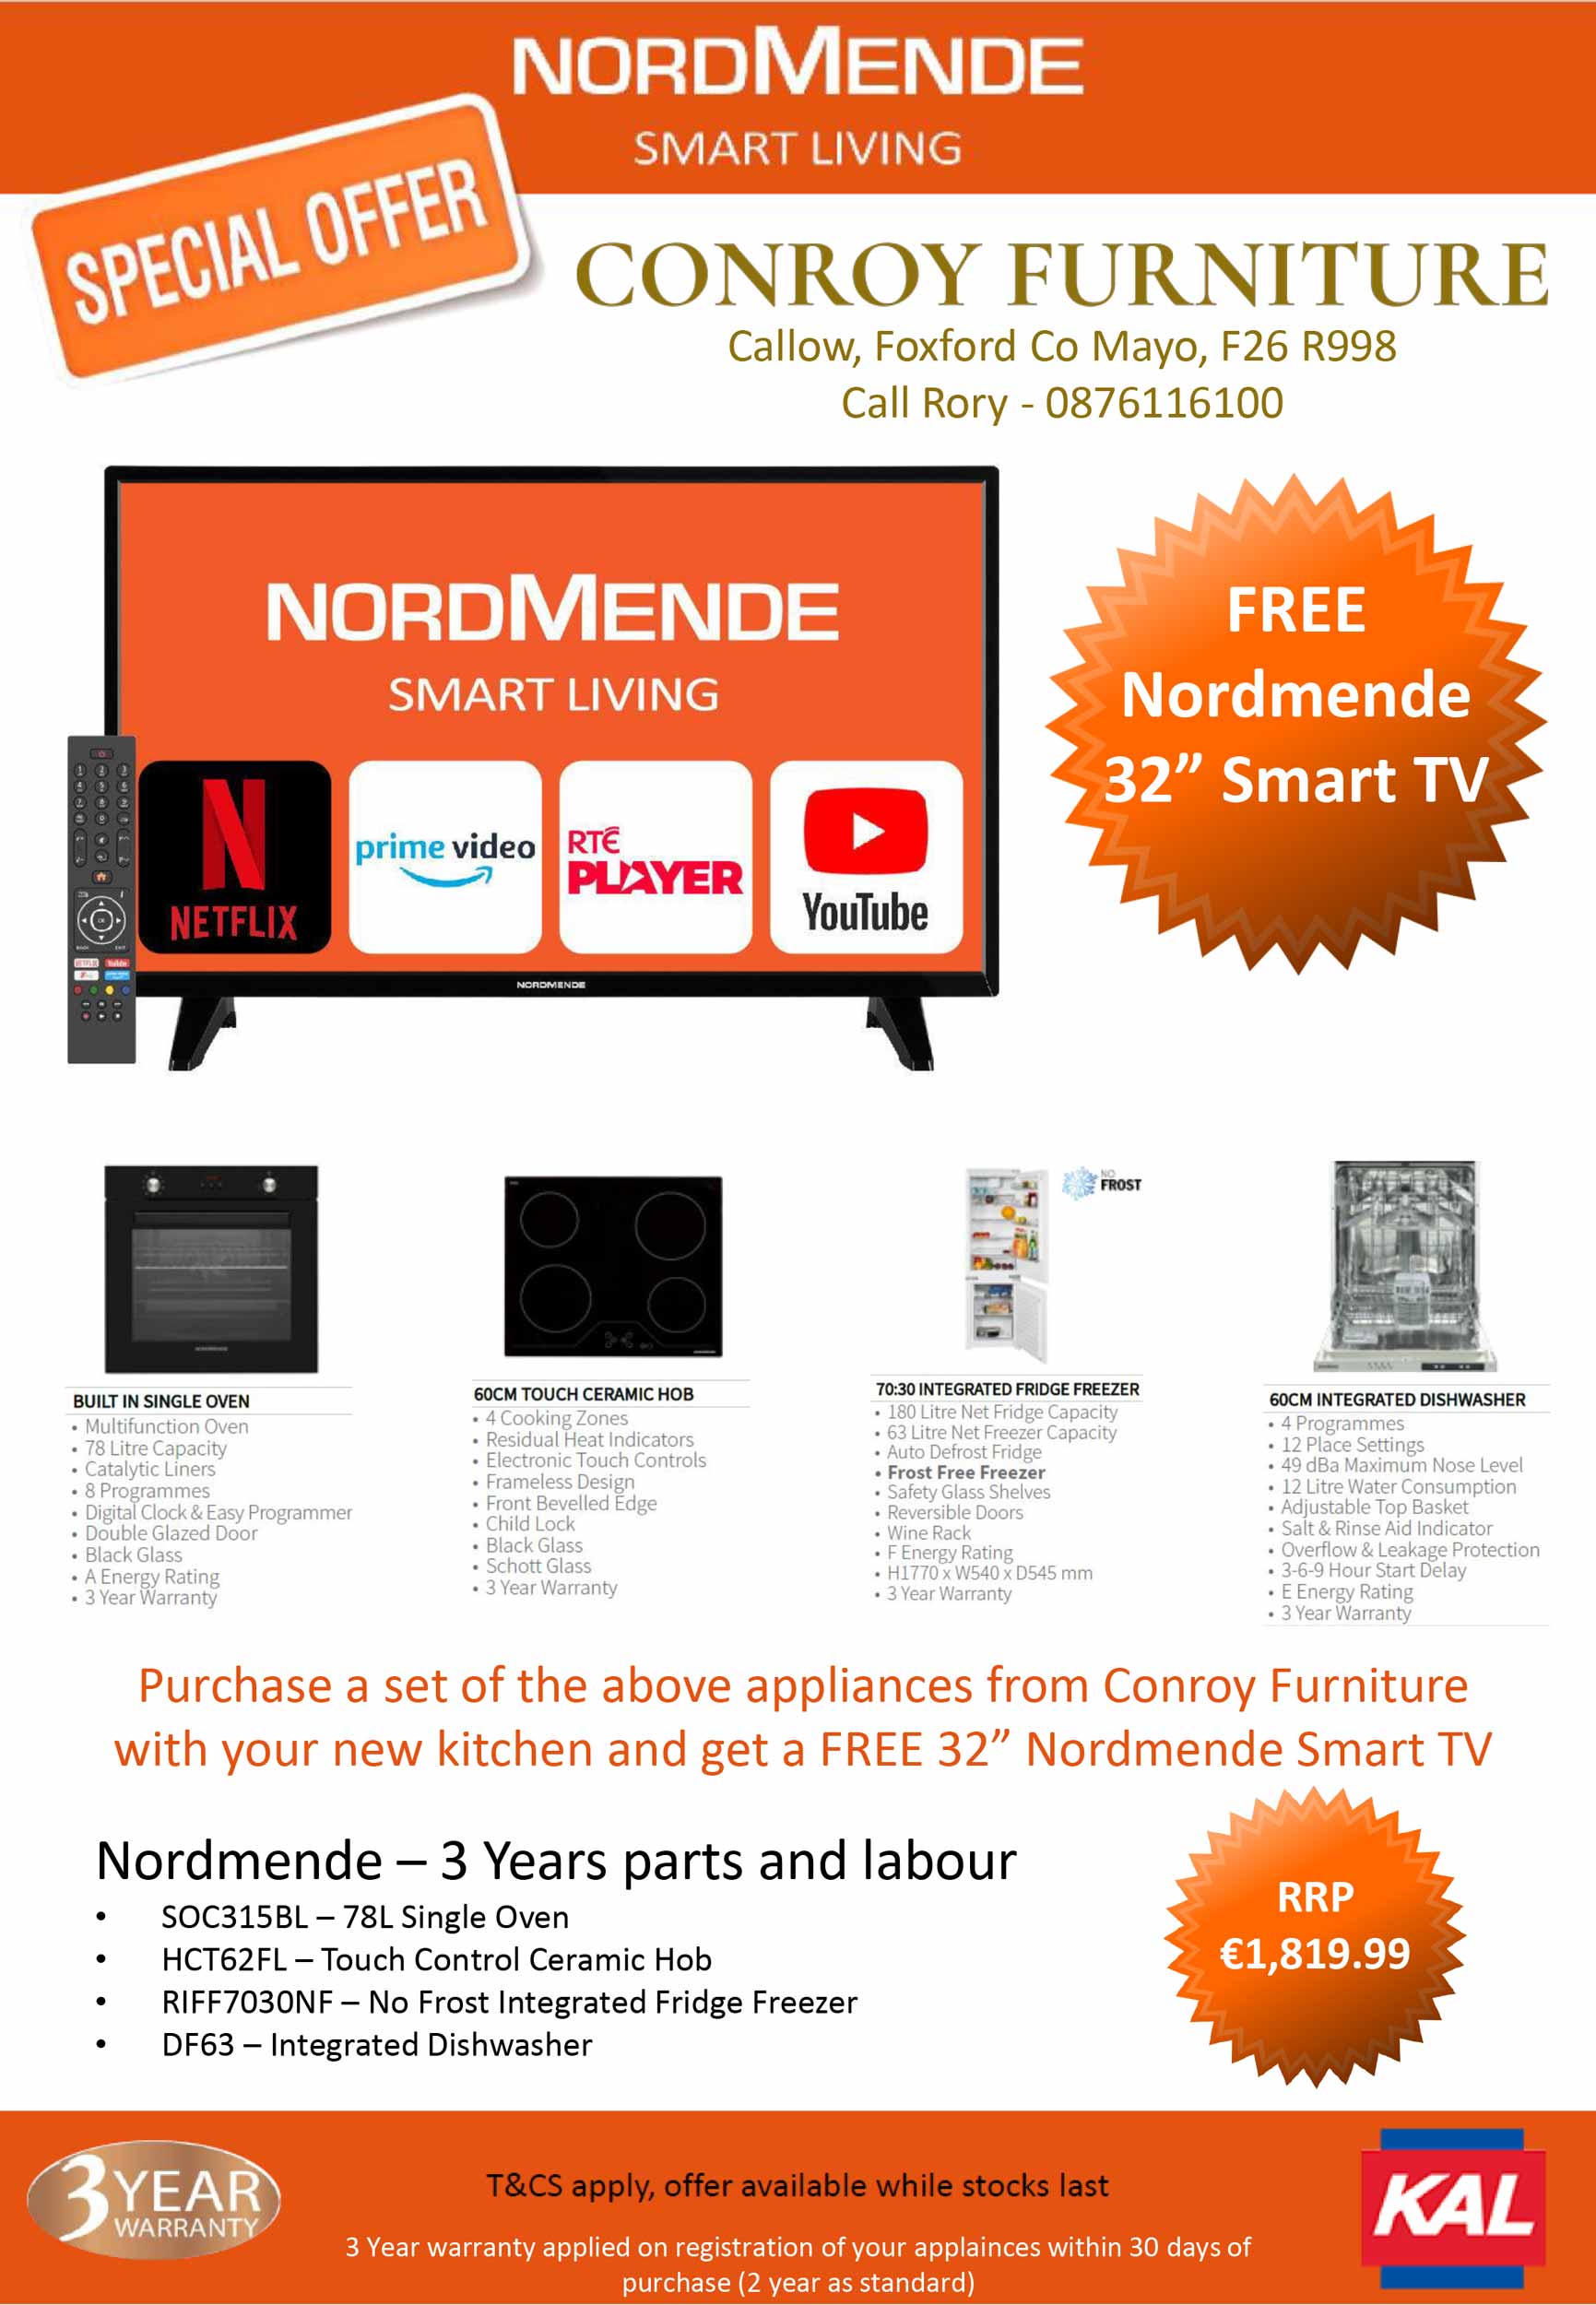 Nordmende special offer Conroy Furniture